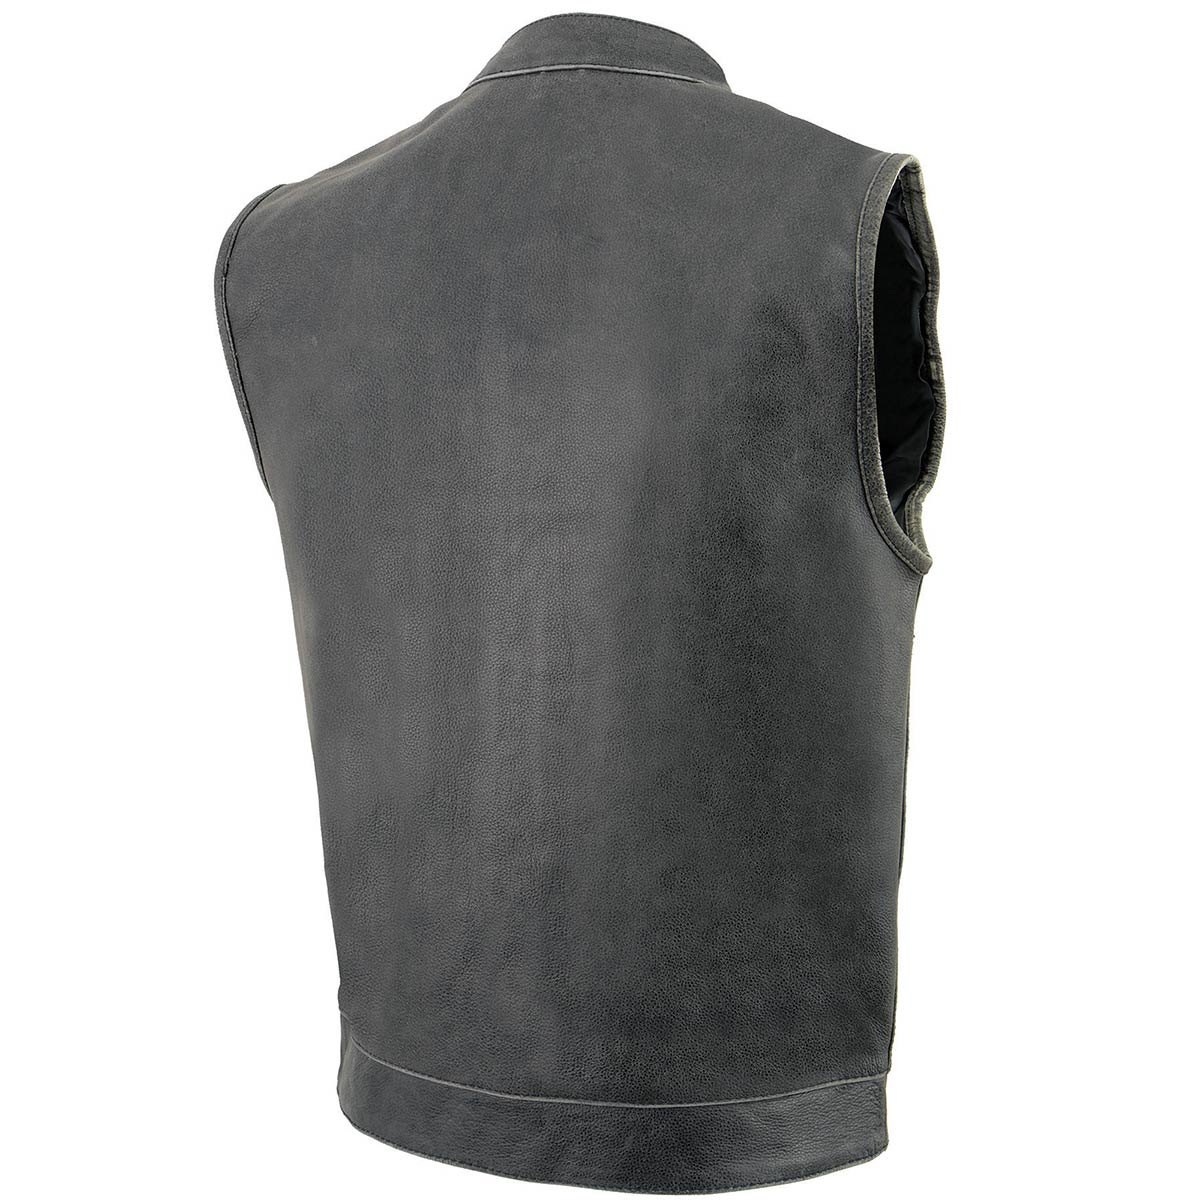 Men's Distressed Grey Dual Closure Open Neck Club Style Motorcycle Leather Vest